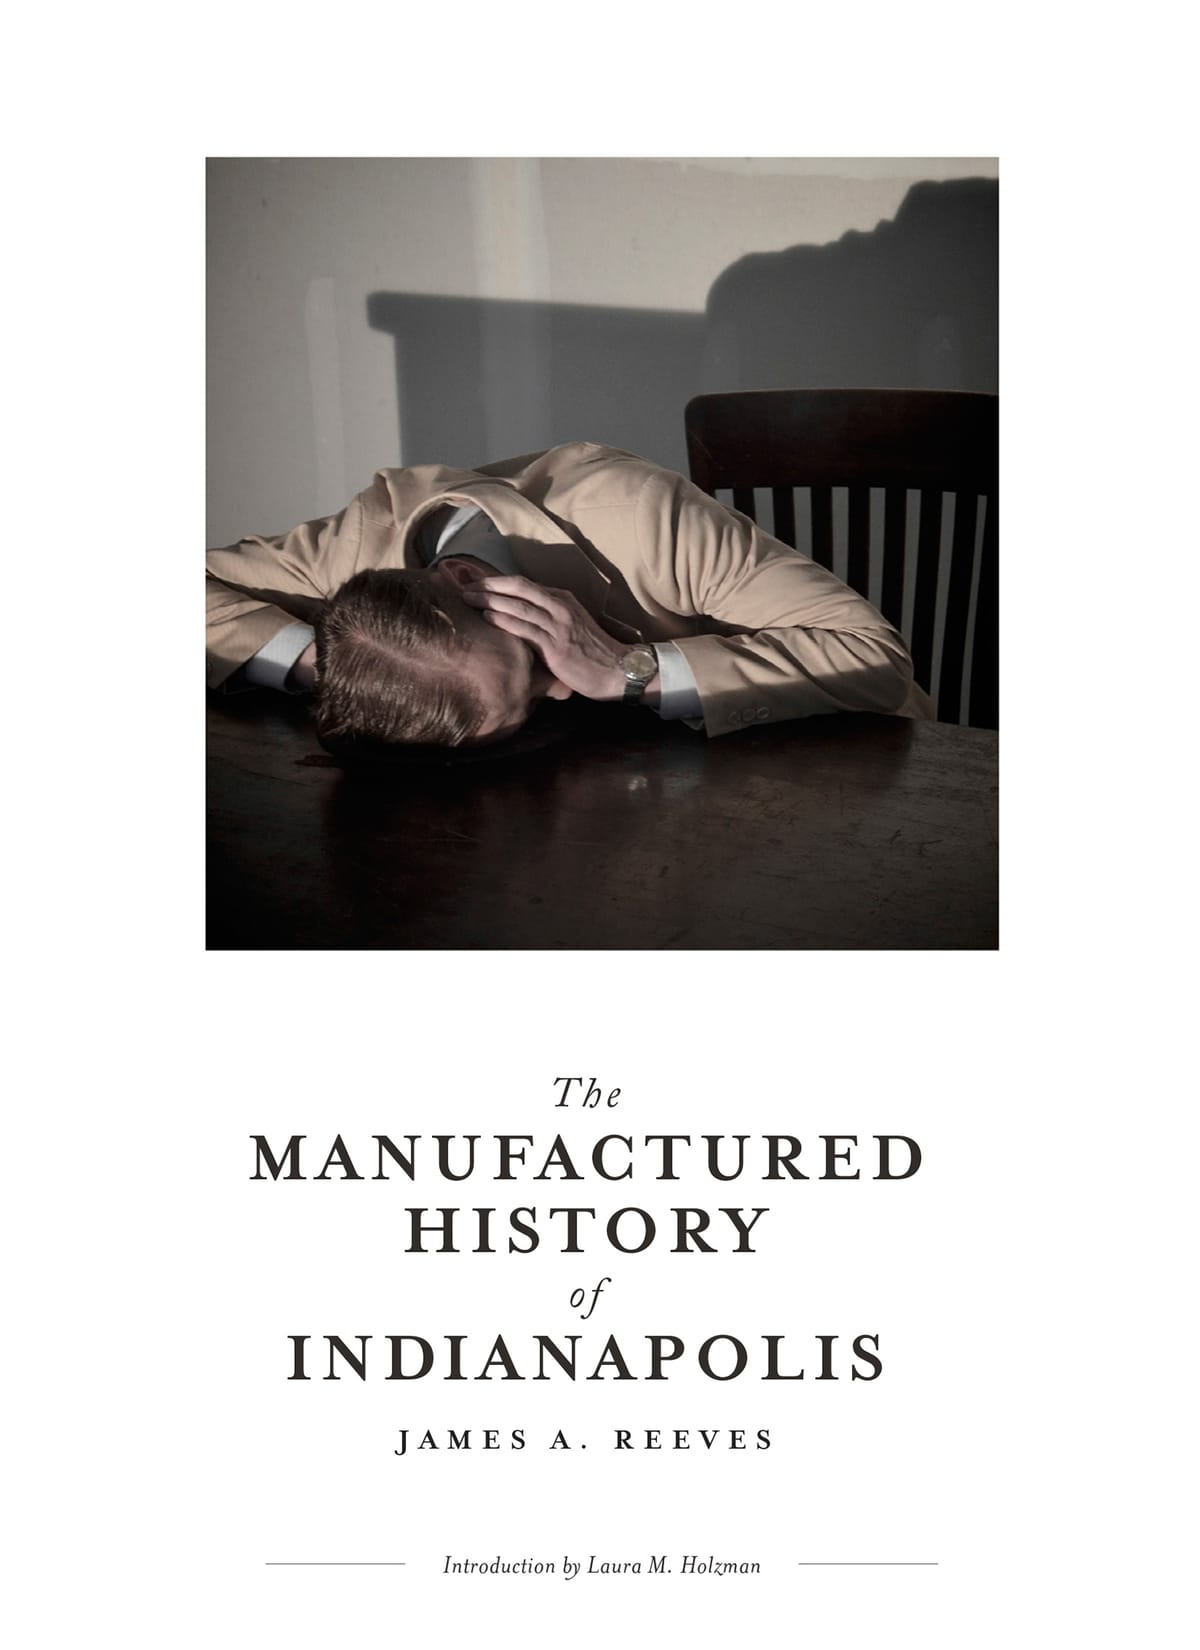 The Manufactured History of Indianapolis